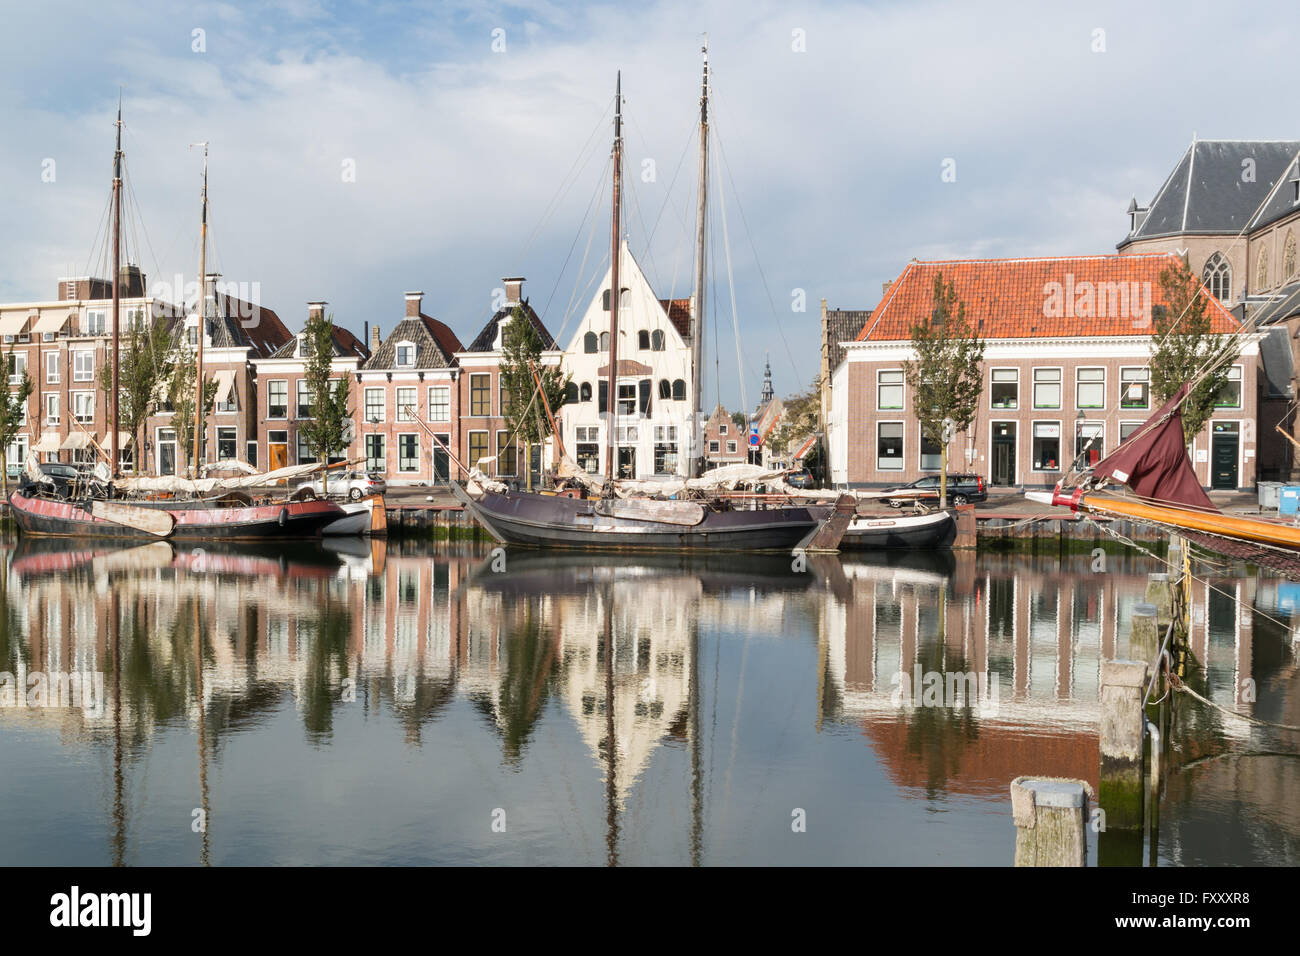 Old houses on quay of Zuiderhaven harbor canal with boats in Harlingen, Friesland, Netherlands Stock Photo